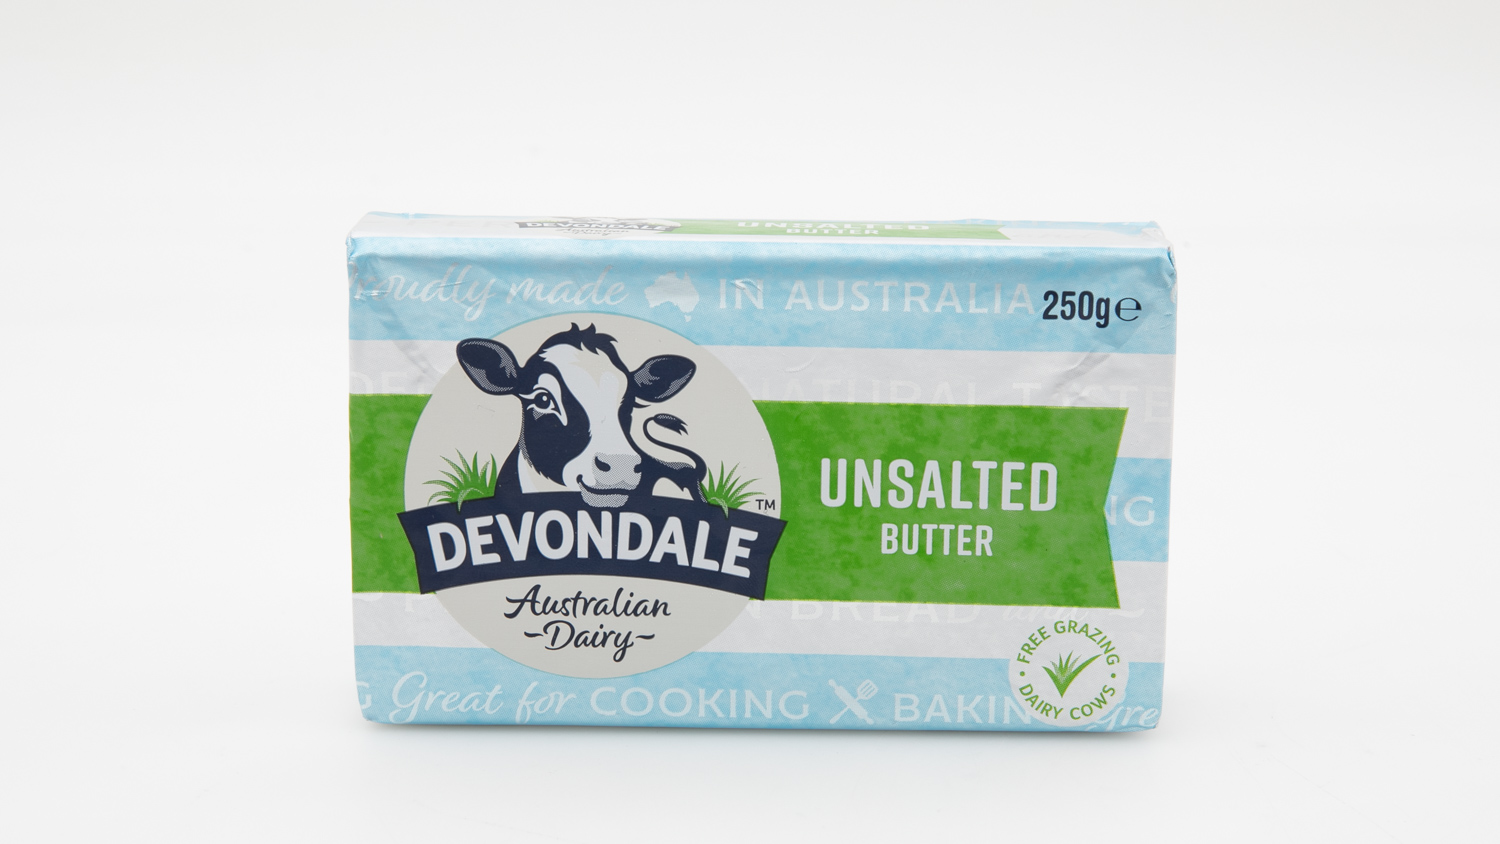 Devondale Unsalted Butter carousel image